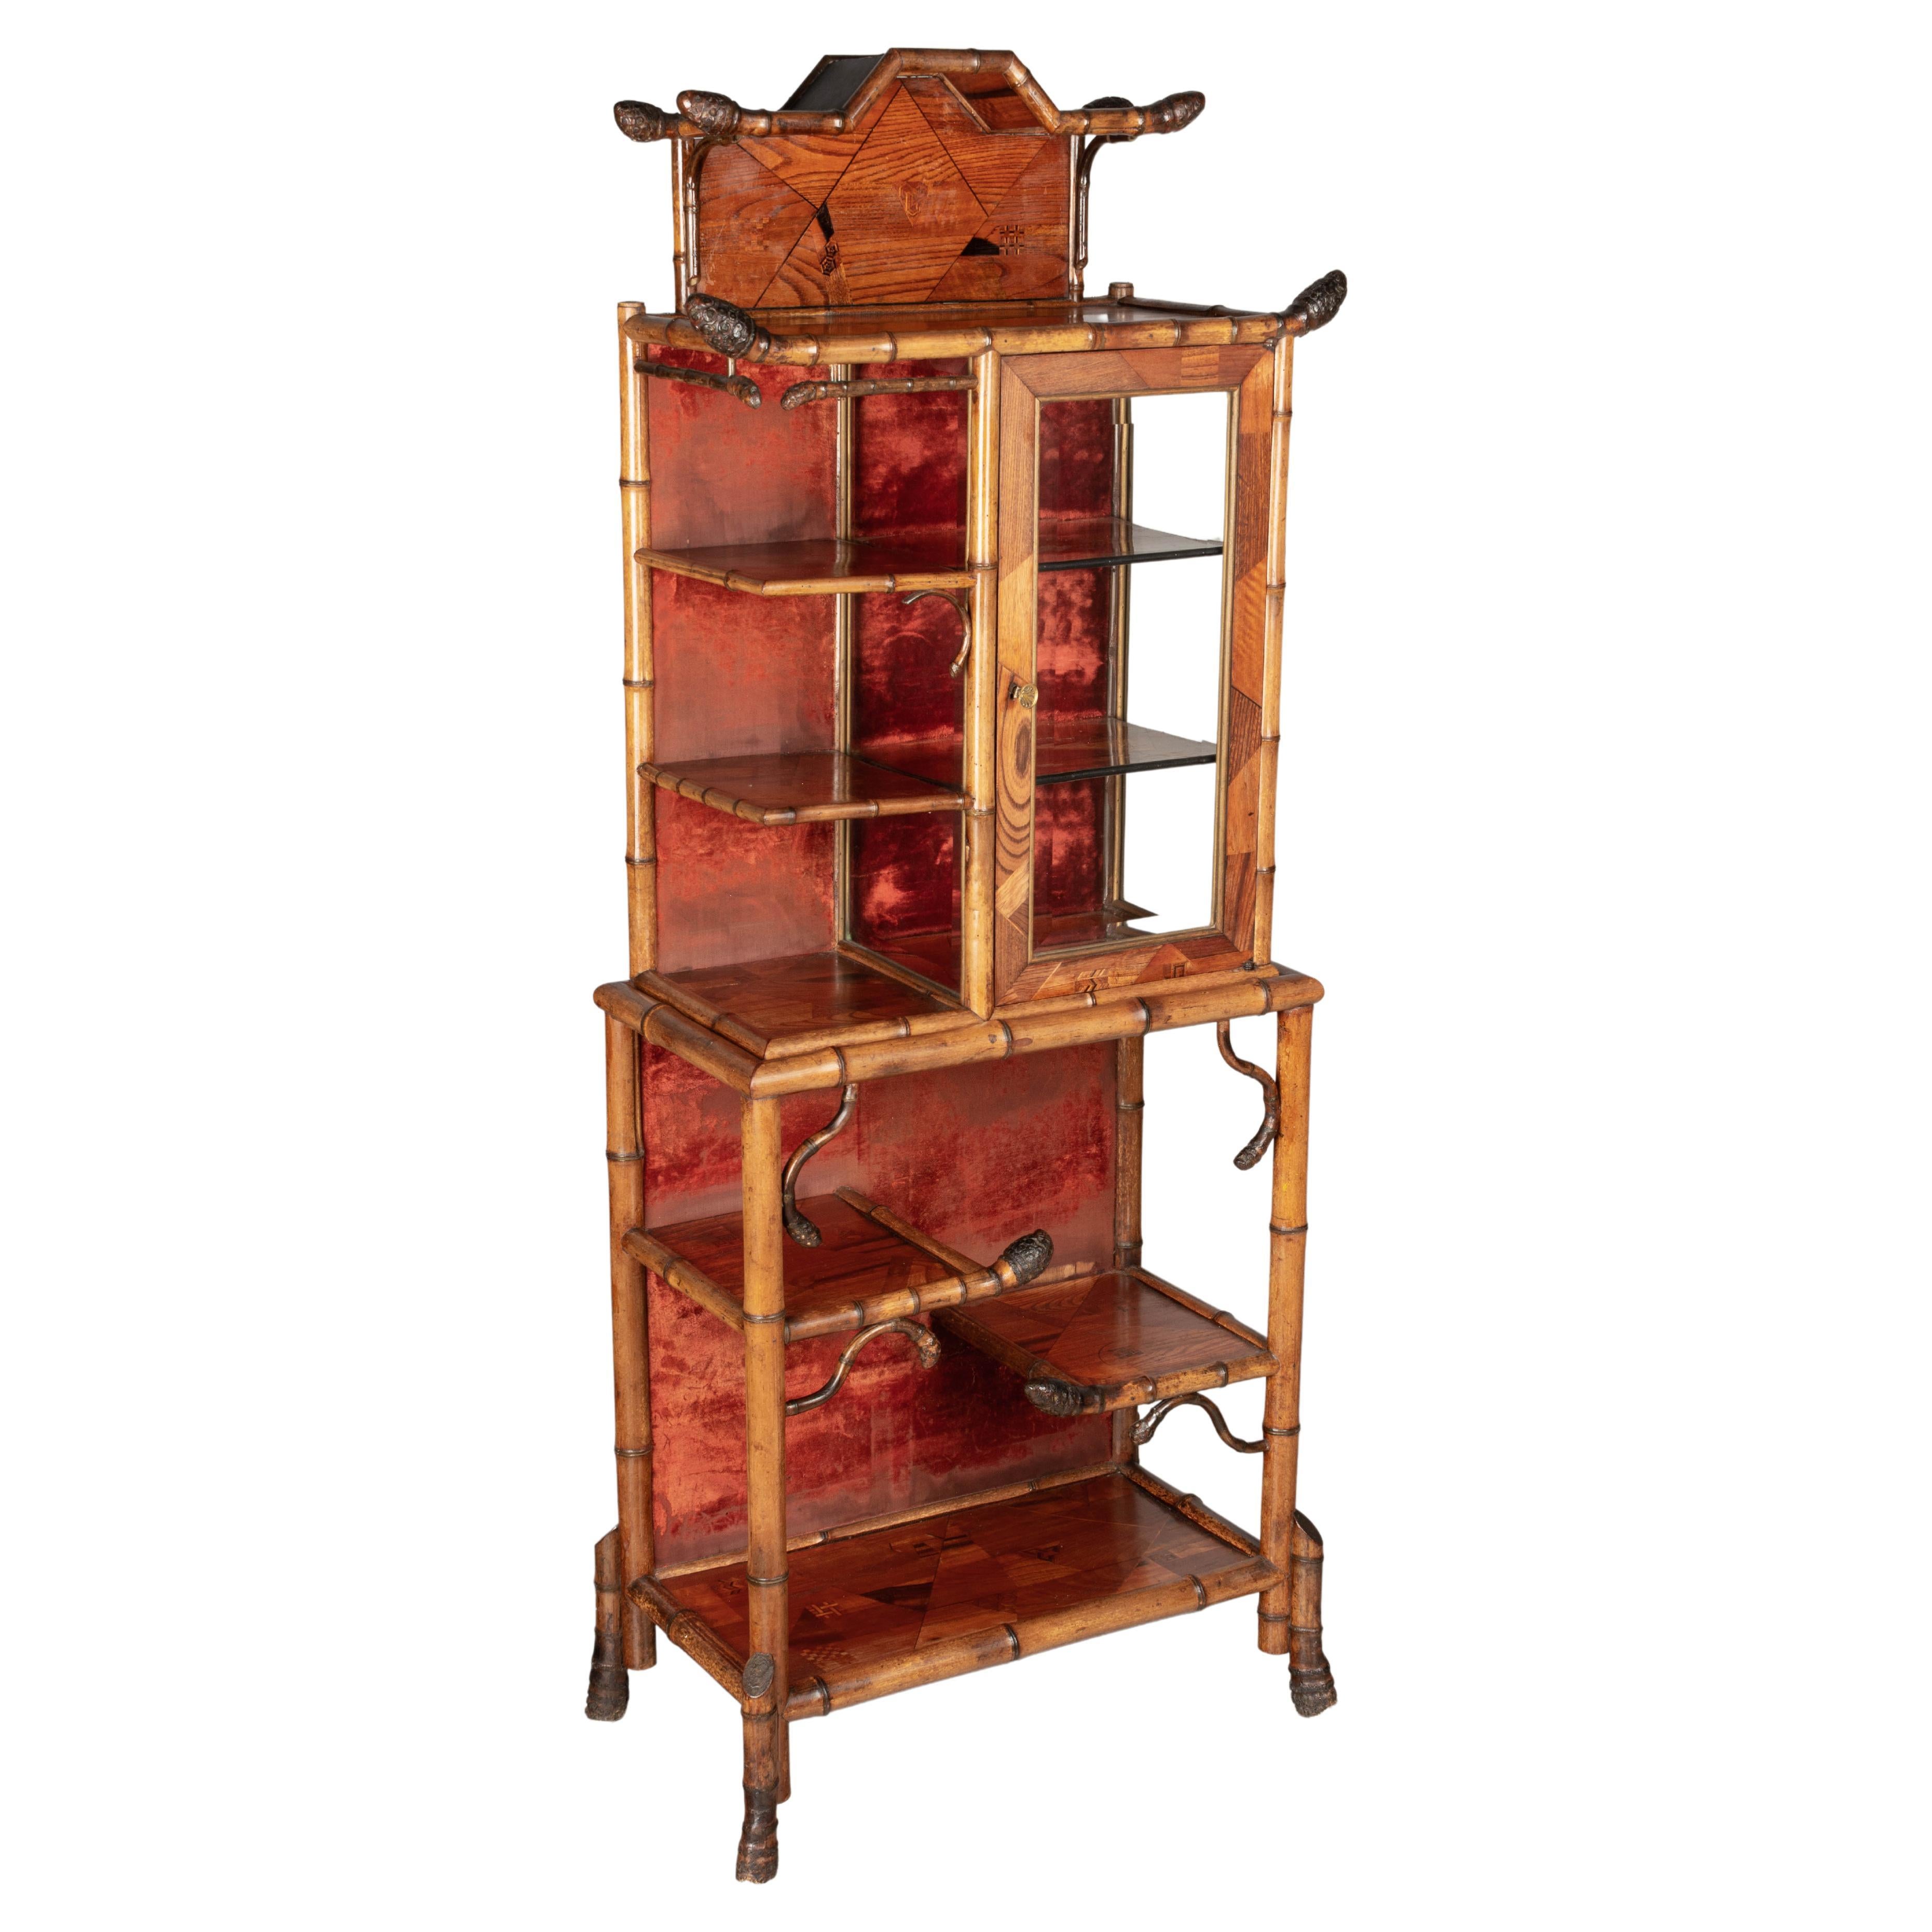 19th Century French Bamboo Japonisme Marquetry Etagere